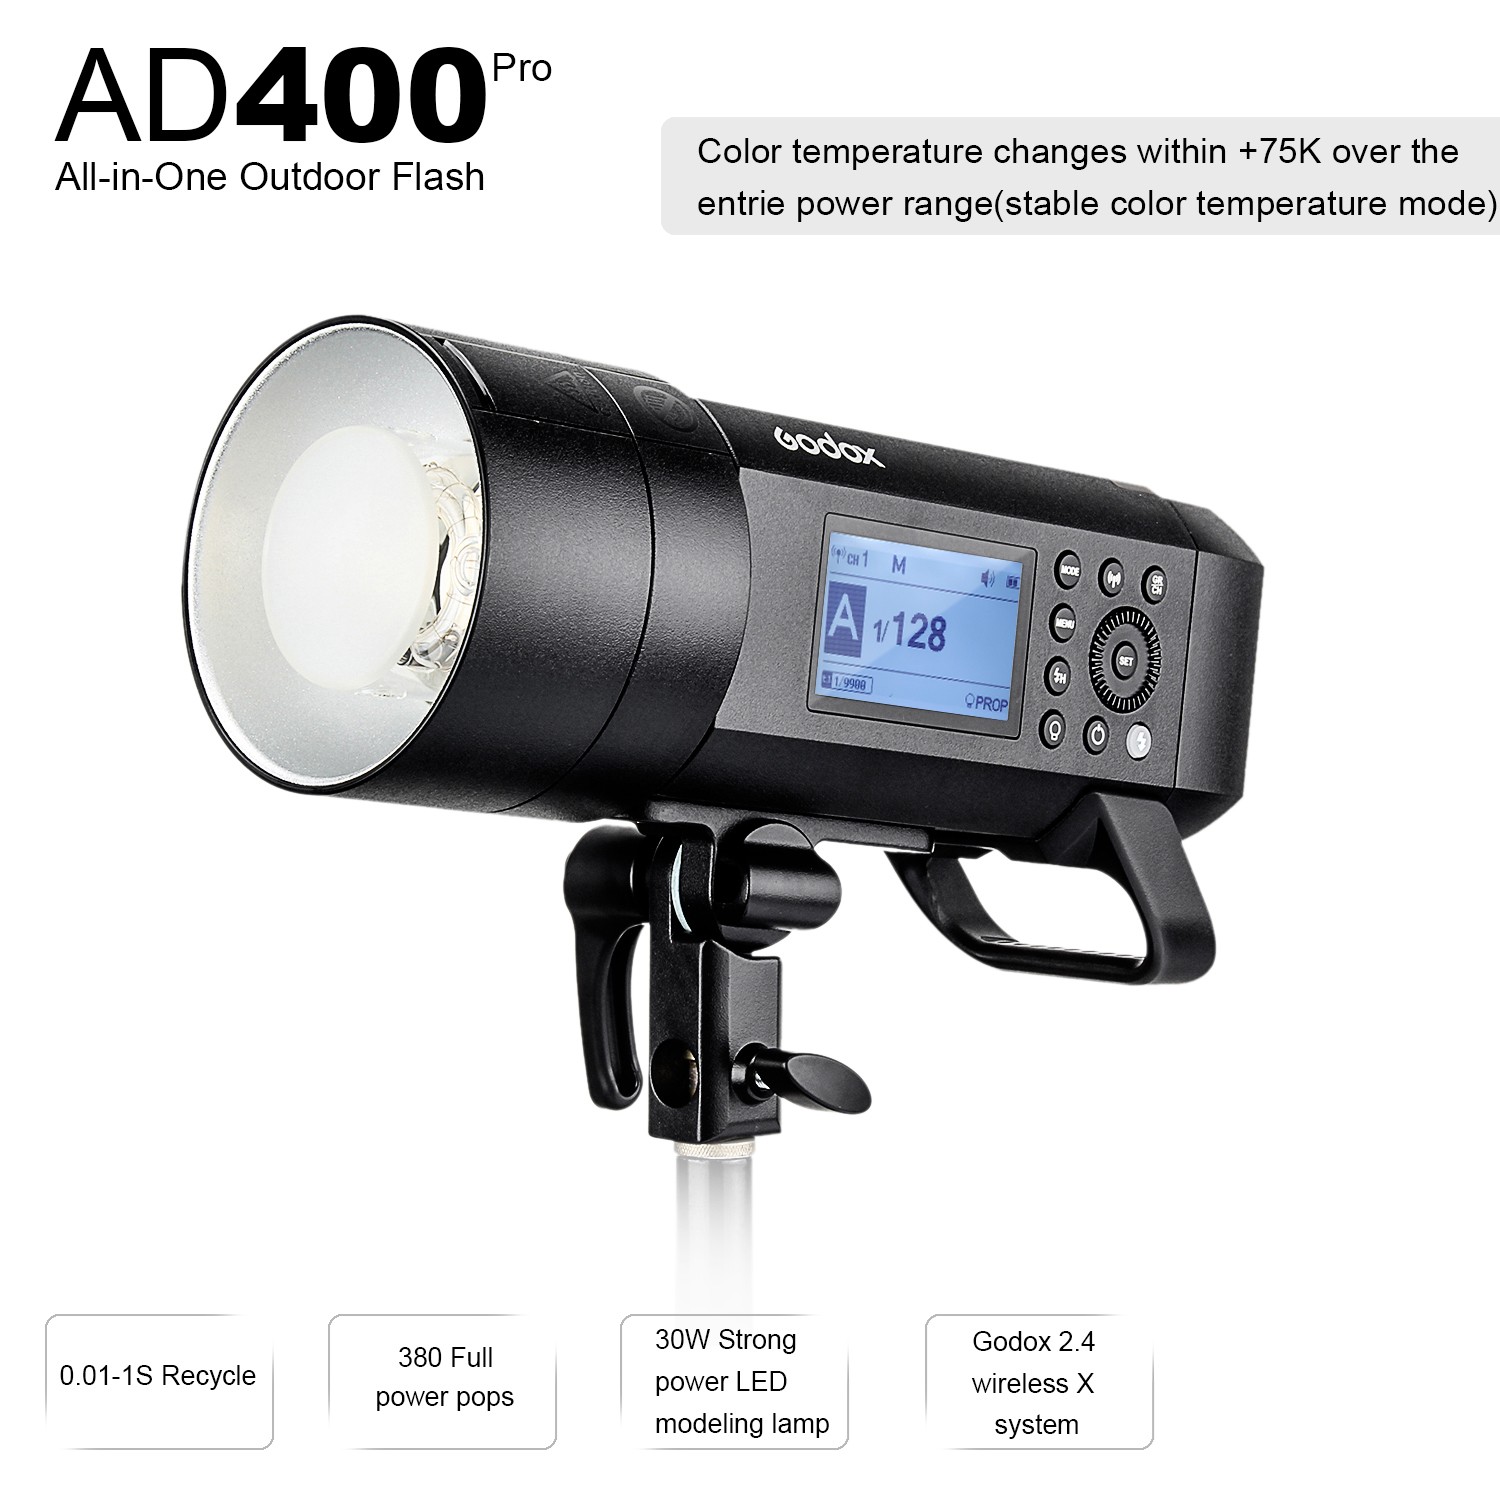 30w LED Modeling Lamp Godox AD400 Pro AD400Pro 400ws GN72 TTL Battery-Powered Monolight 0.01-1s Recycle Time 1/8000 HSS Outdoor Flash Strobe Light Built-in Godox 2.4G System 390 Full Power Pops 